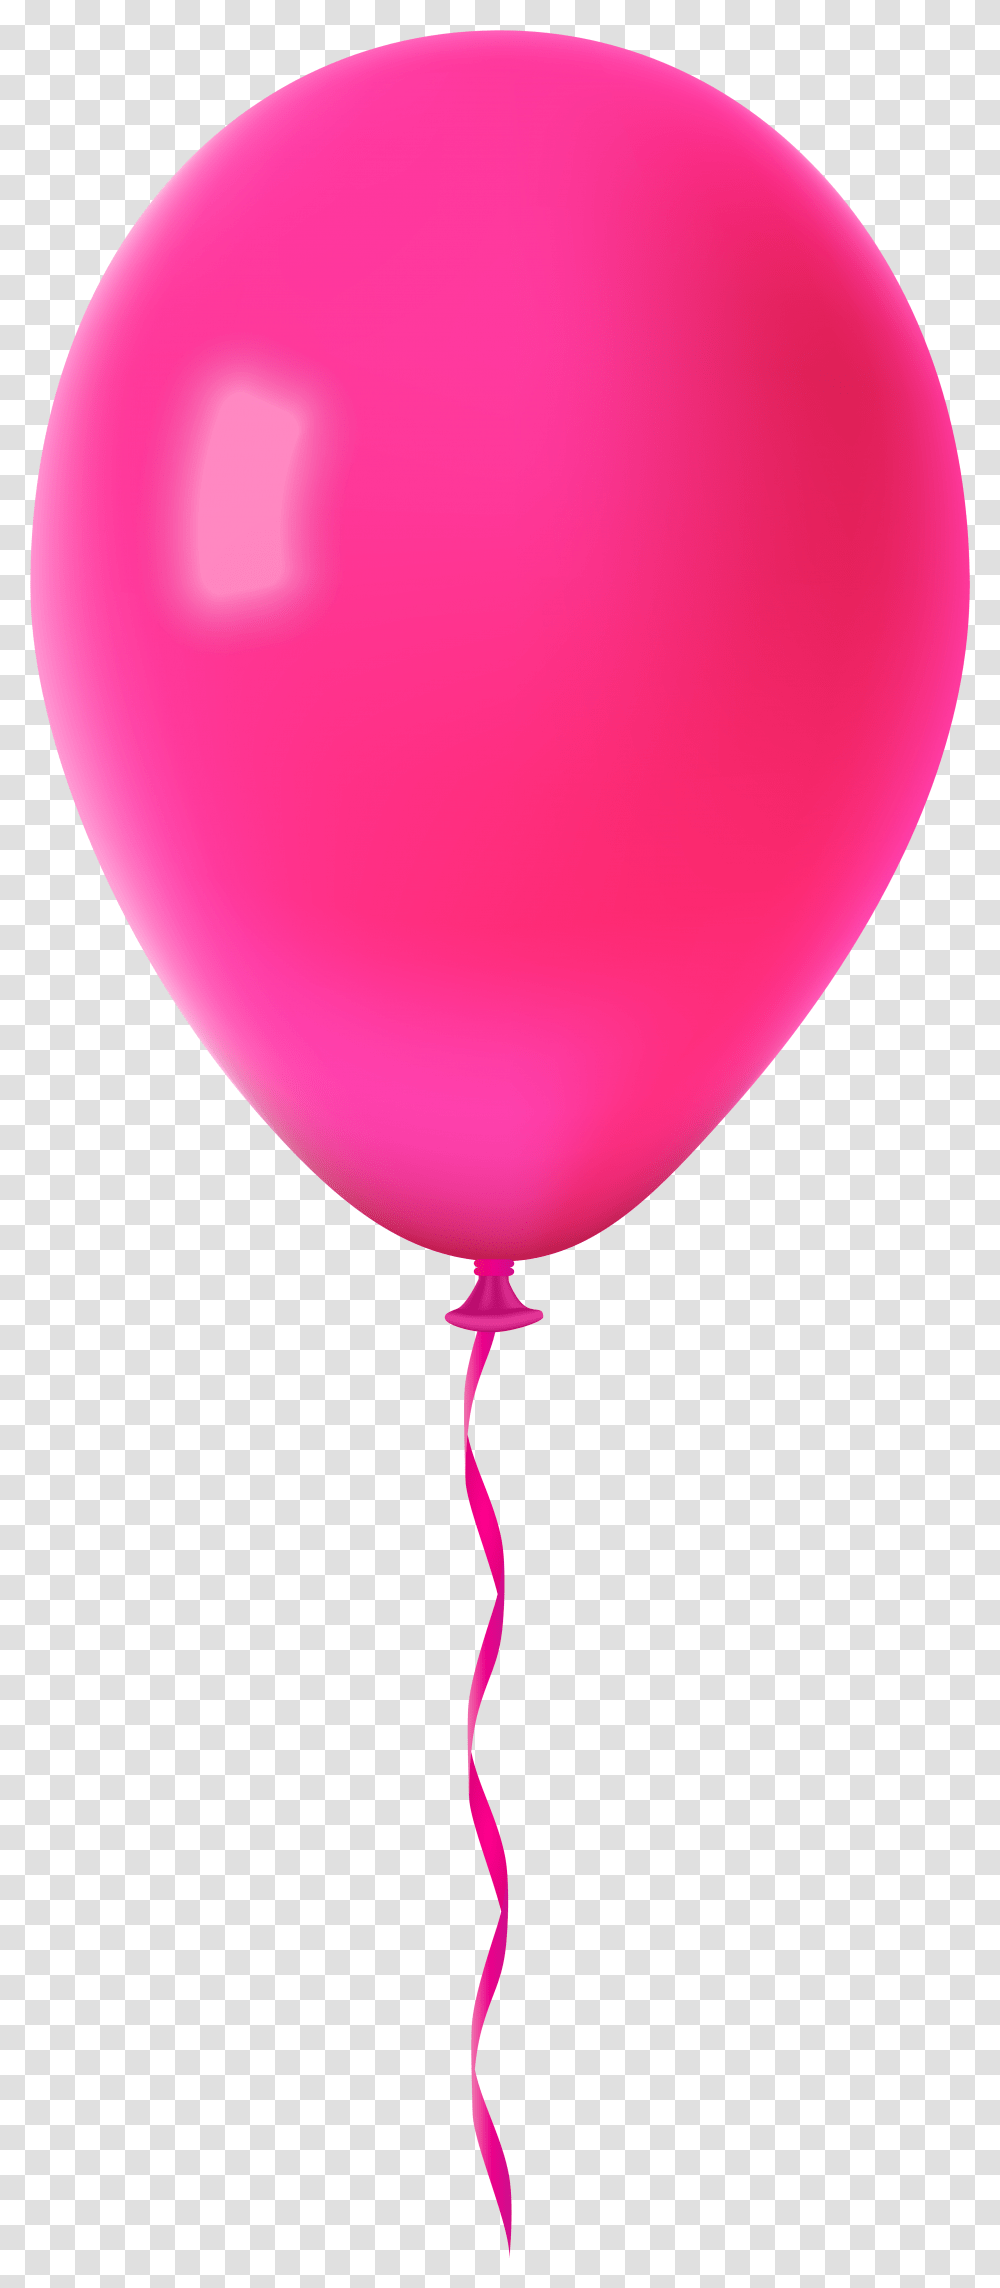 Pink Balloon Background Balloon Pink Background Transparent Png